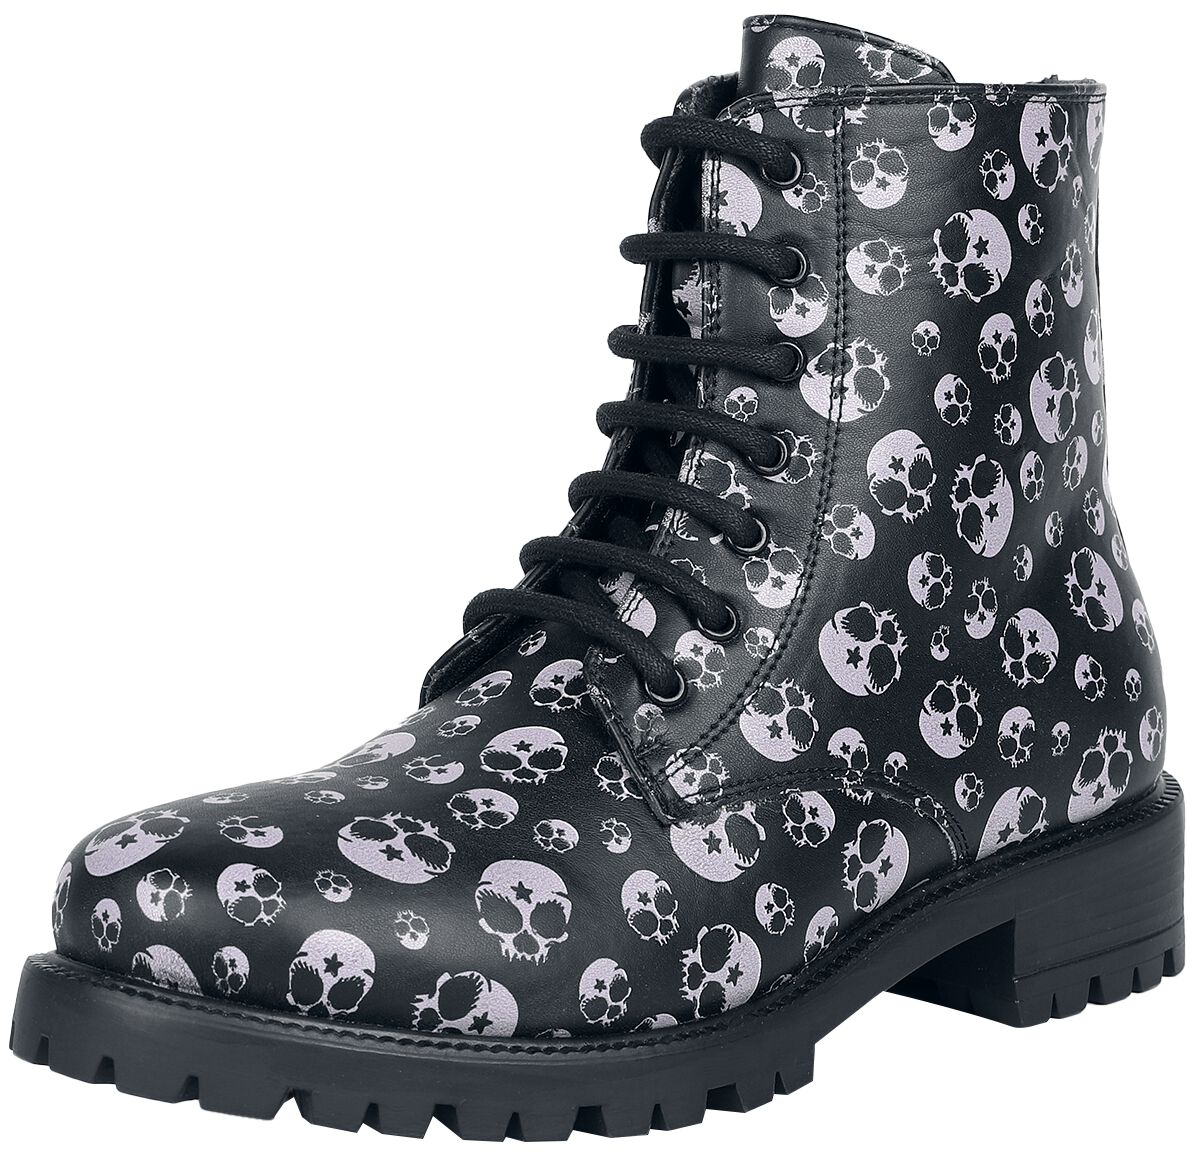 Full Volume by EMP Boots with Skull Alloverprint Boot schwarz in EU39